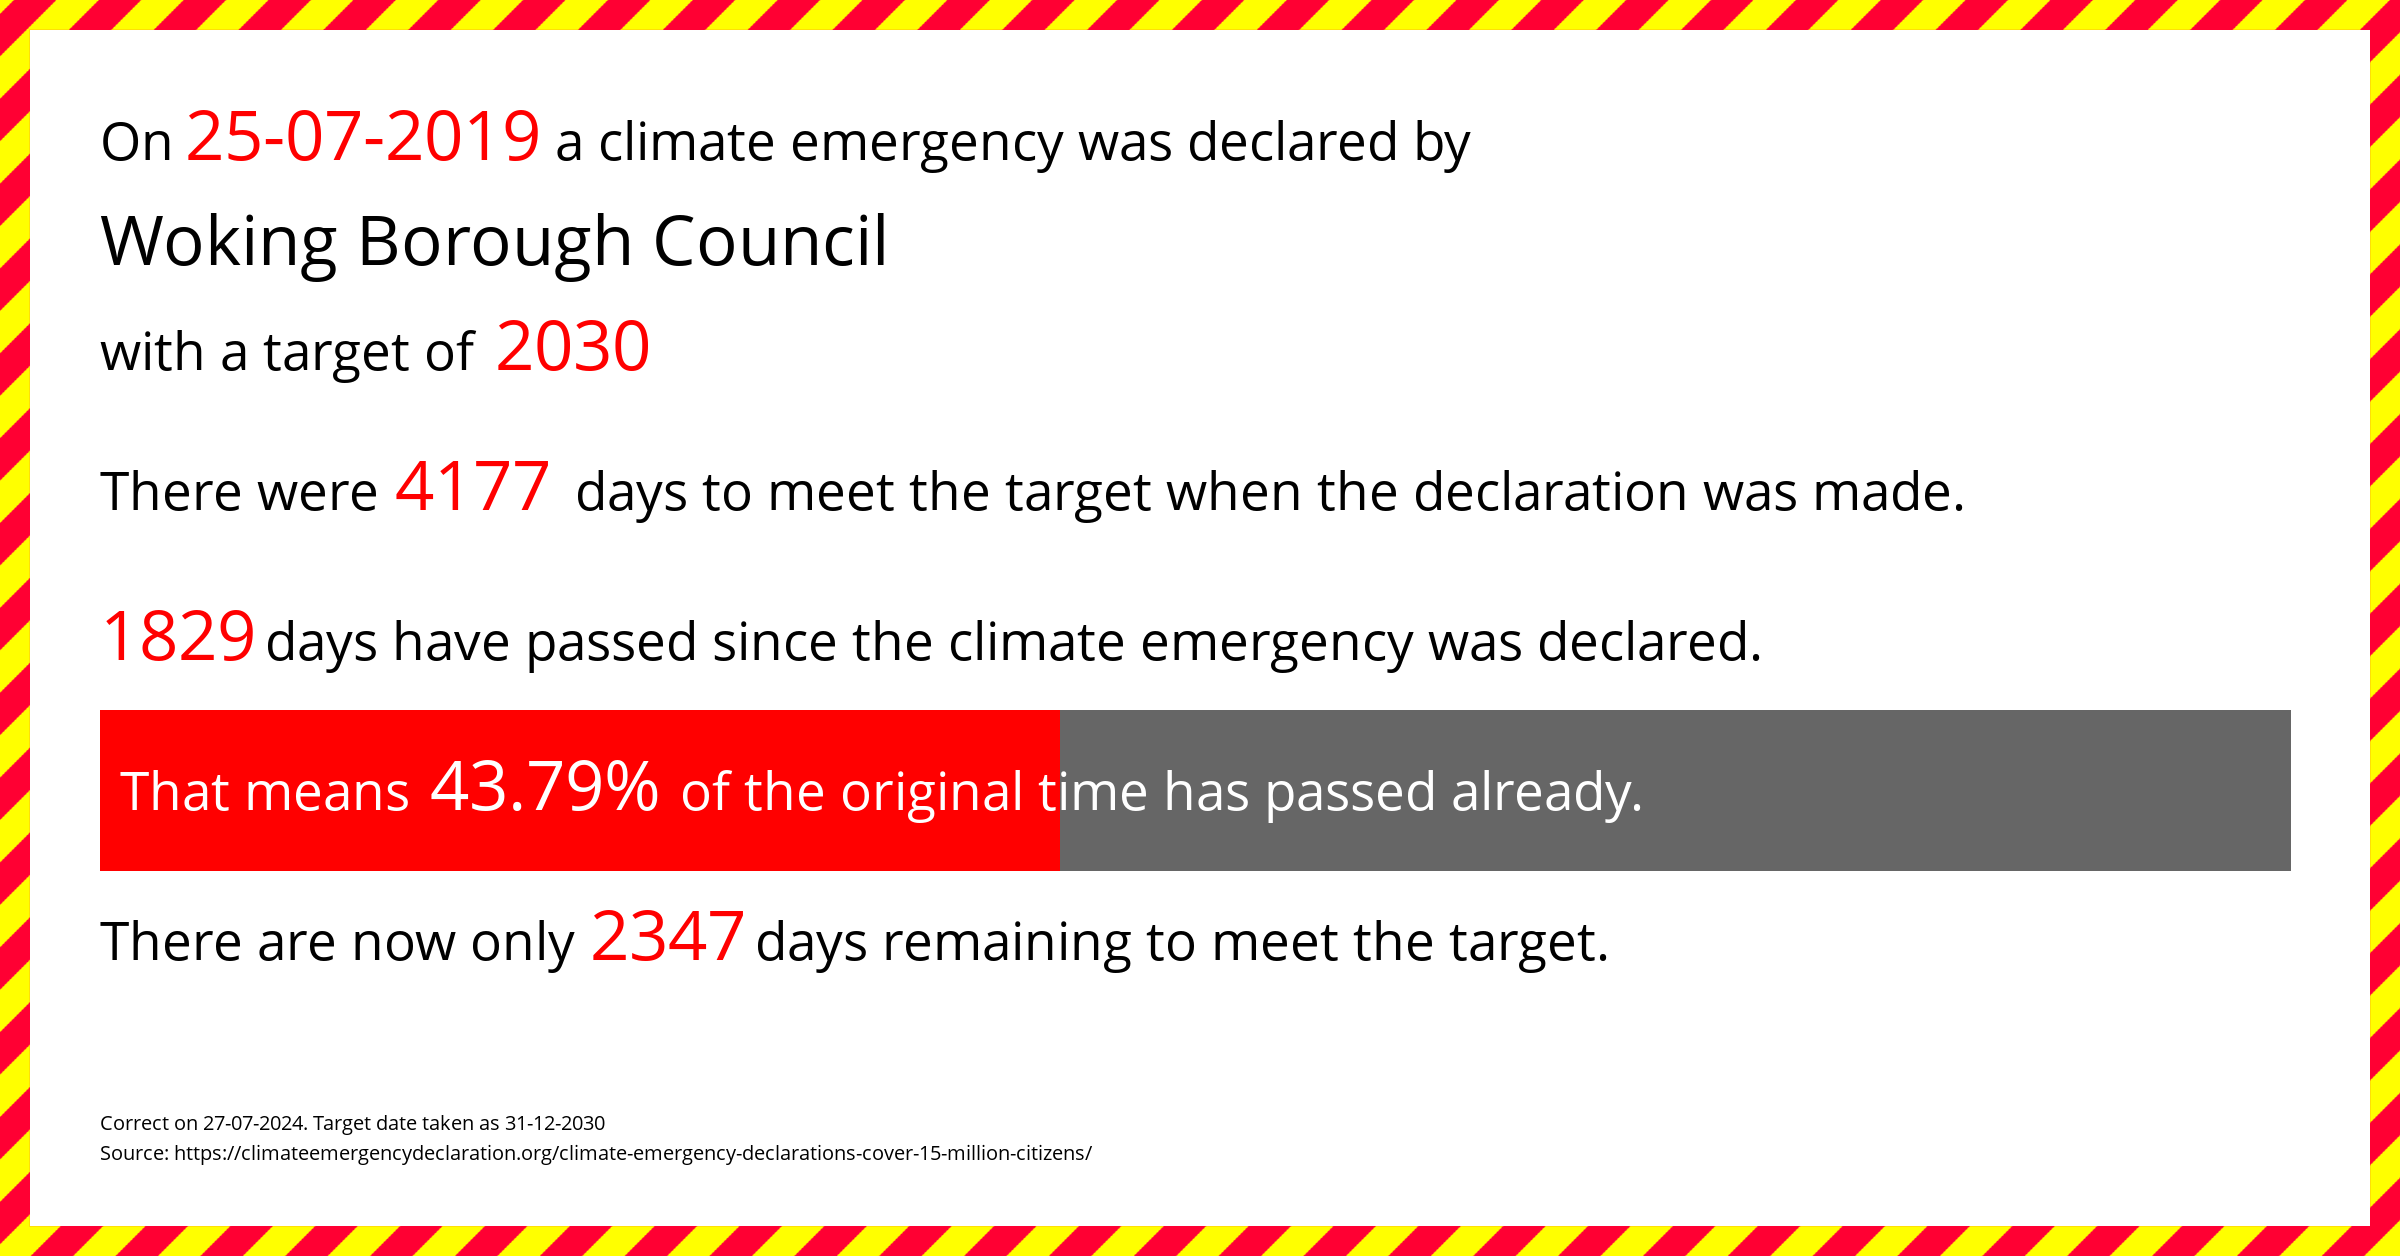 Woking Borough Council declared a Climate emergency on Thursday 25th July 2019, with a target of 2030.